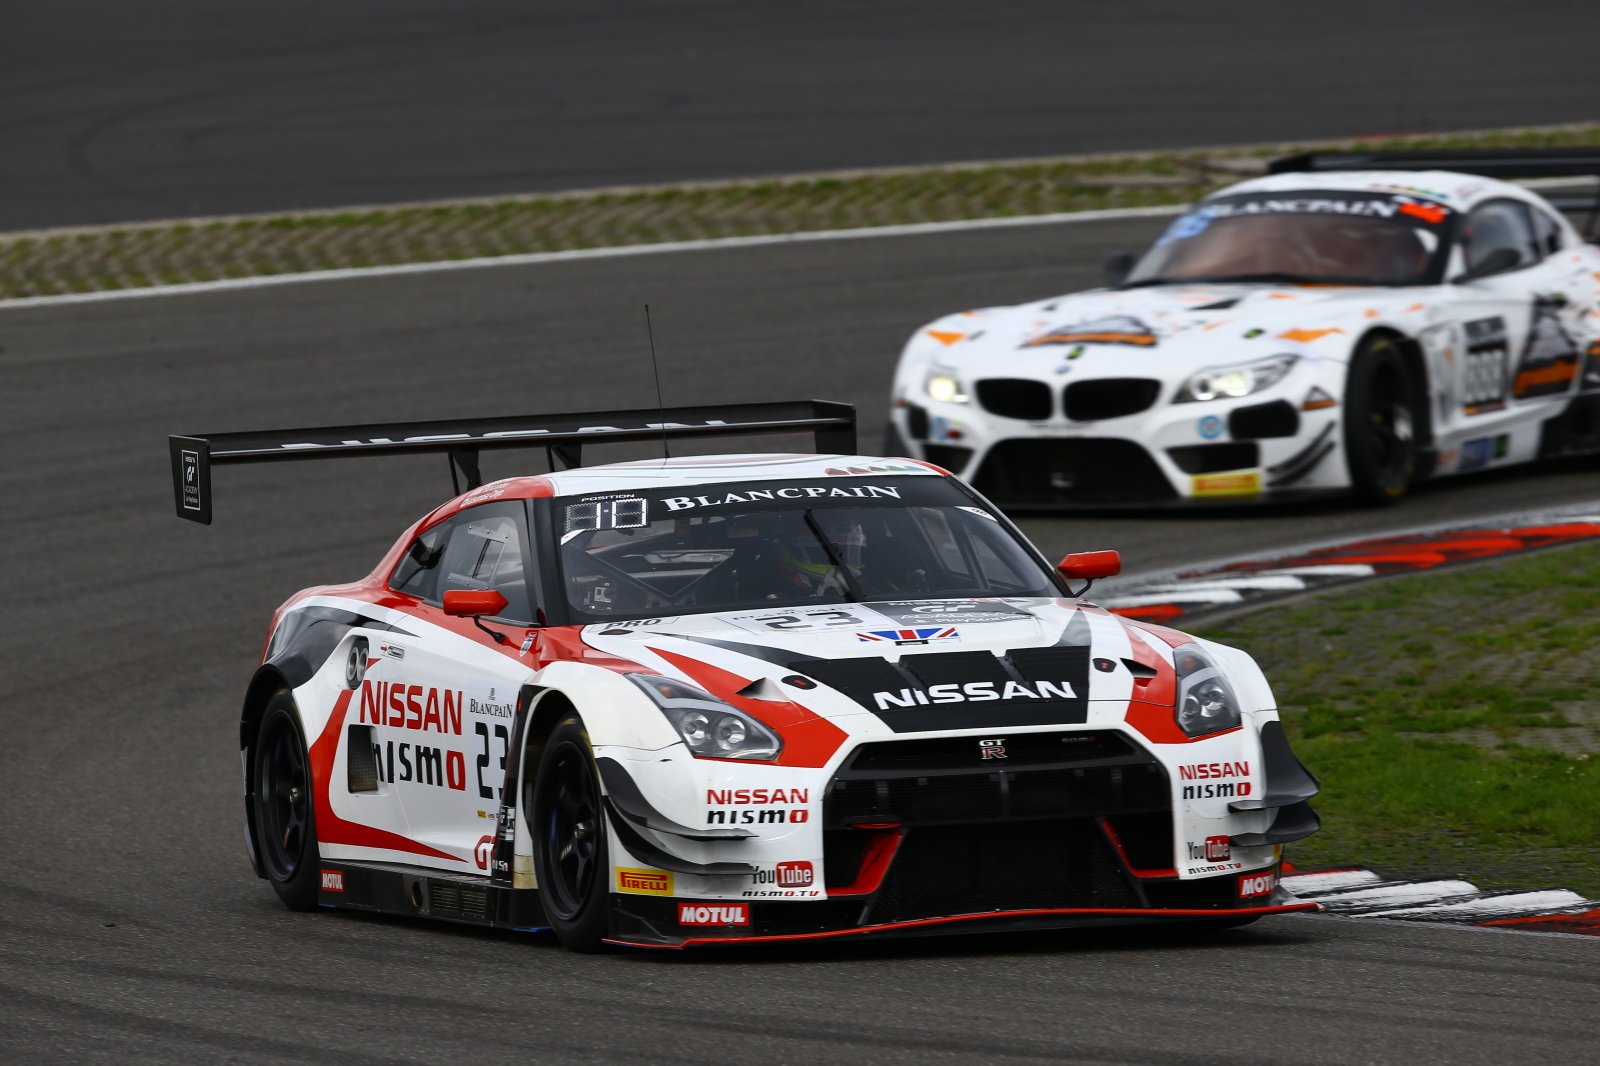 Tests Announced for Drivers to Evaluate the Blancpain Endurance PRO Cup-winning NEW Nissan GT-R NISMO GT3